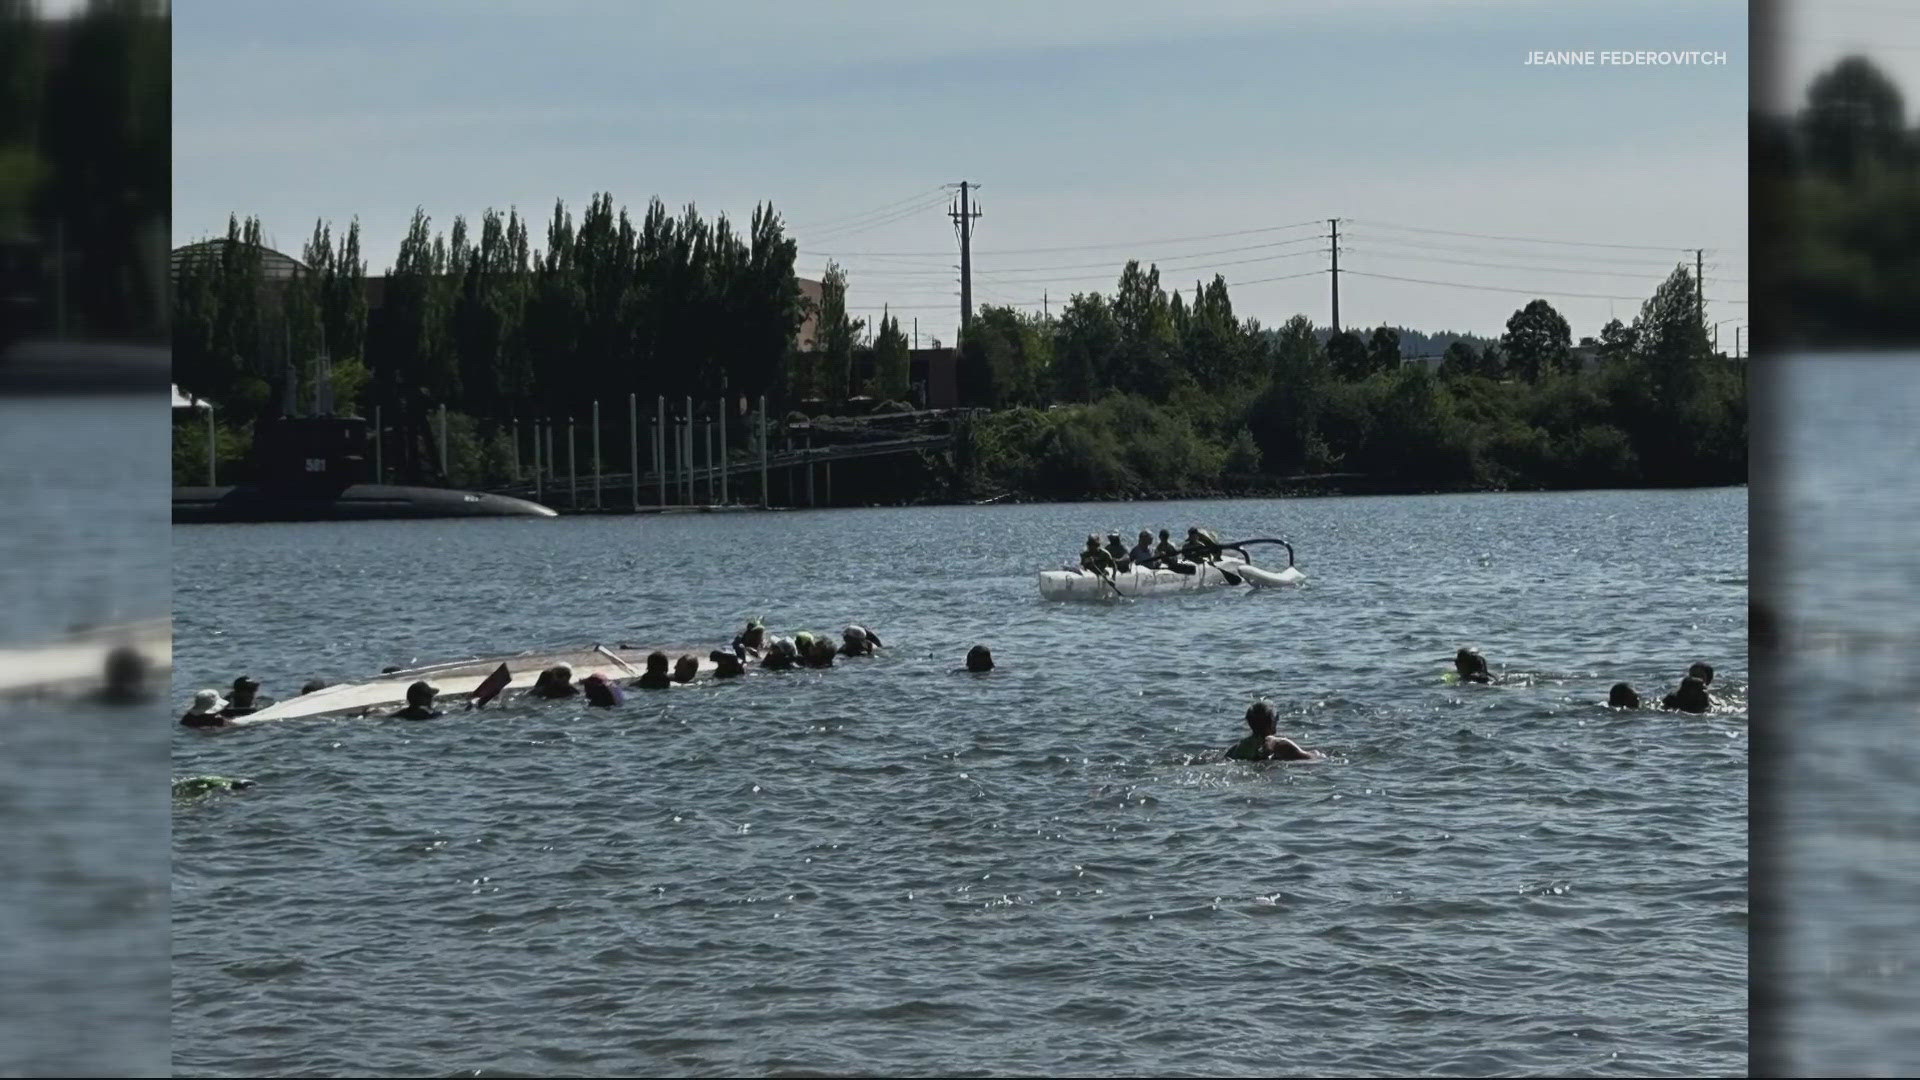 Two incidents occurred less than a week apart. In both cases, the dragon boats were in a no-wake zone near the Marquam and Ross Island bridges.